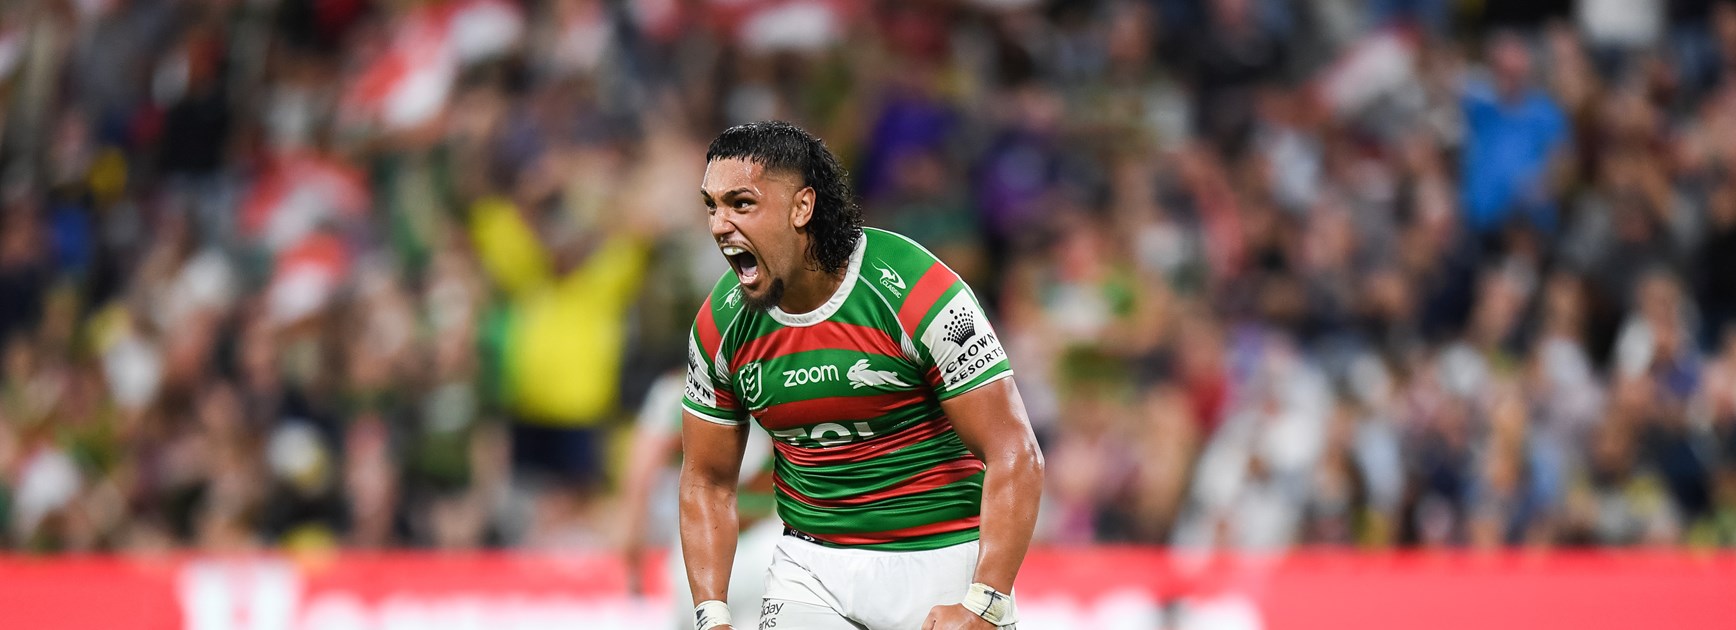 Koloamatangi extends contract with Souths